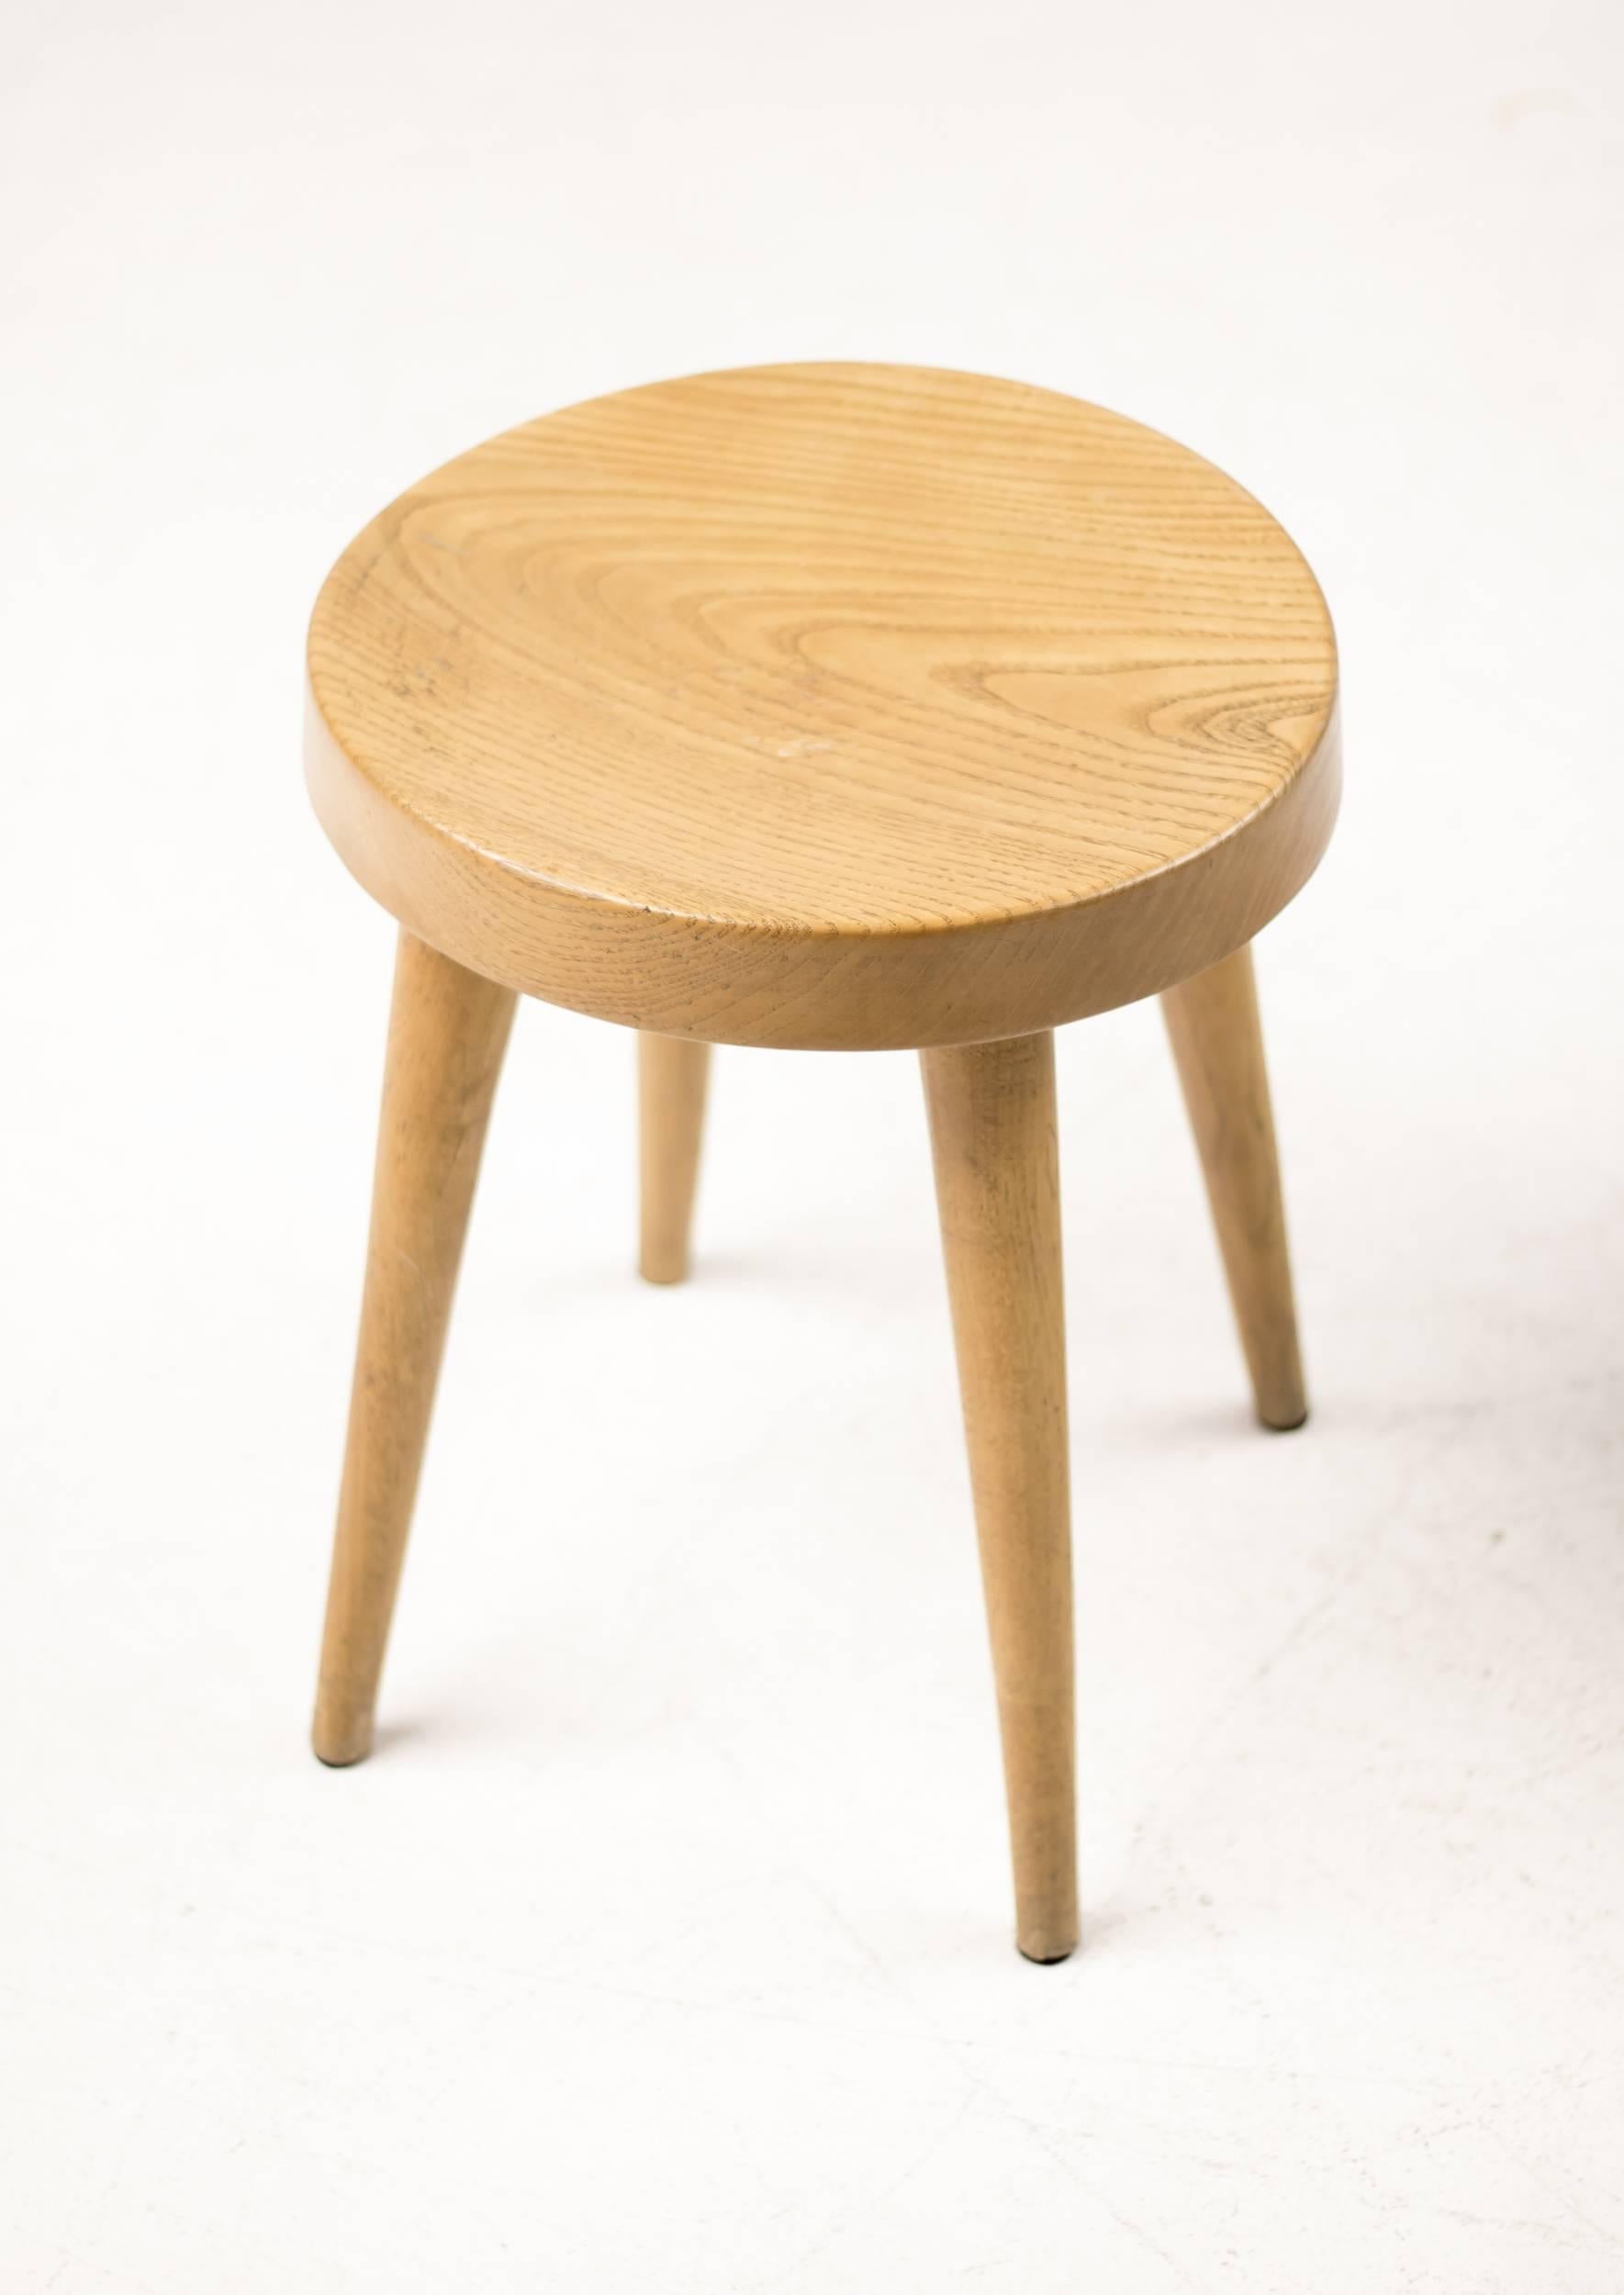 Mid-20th Century Pair of Four-Leg Stools by Charlotte Perriand for Steph Simon For Sale